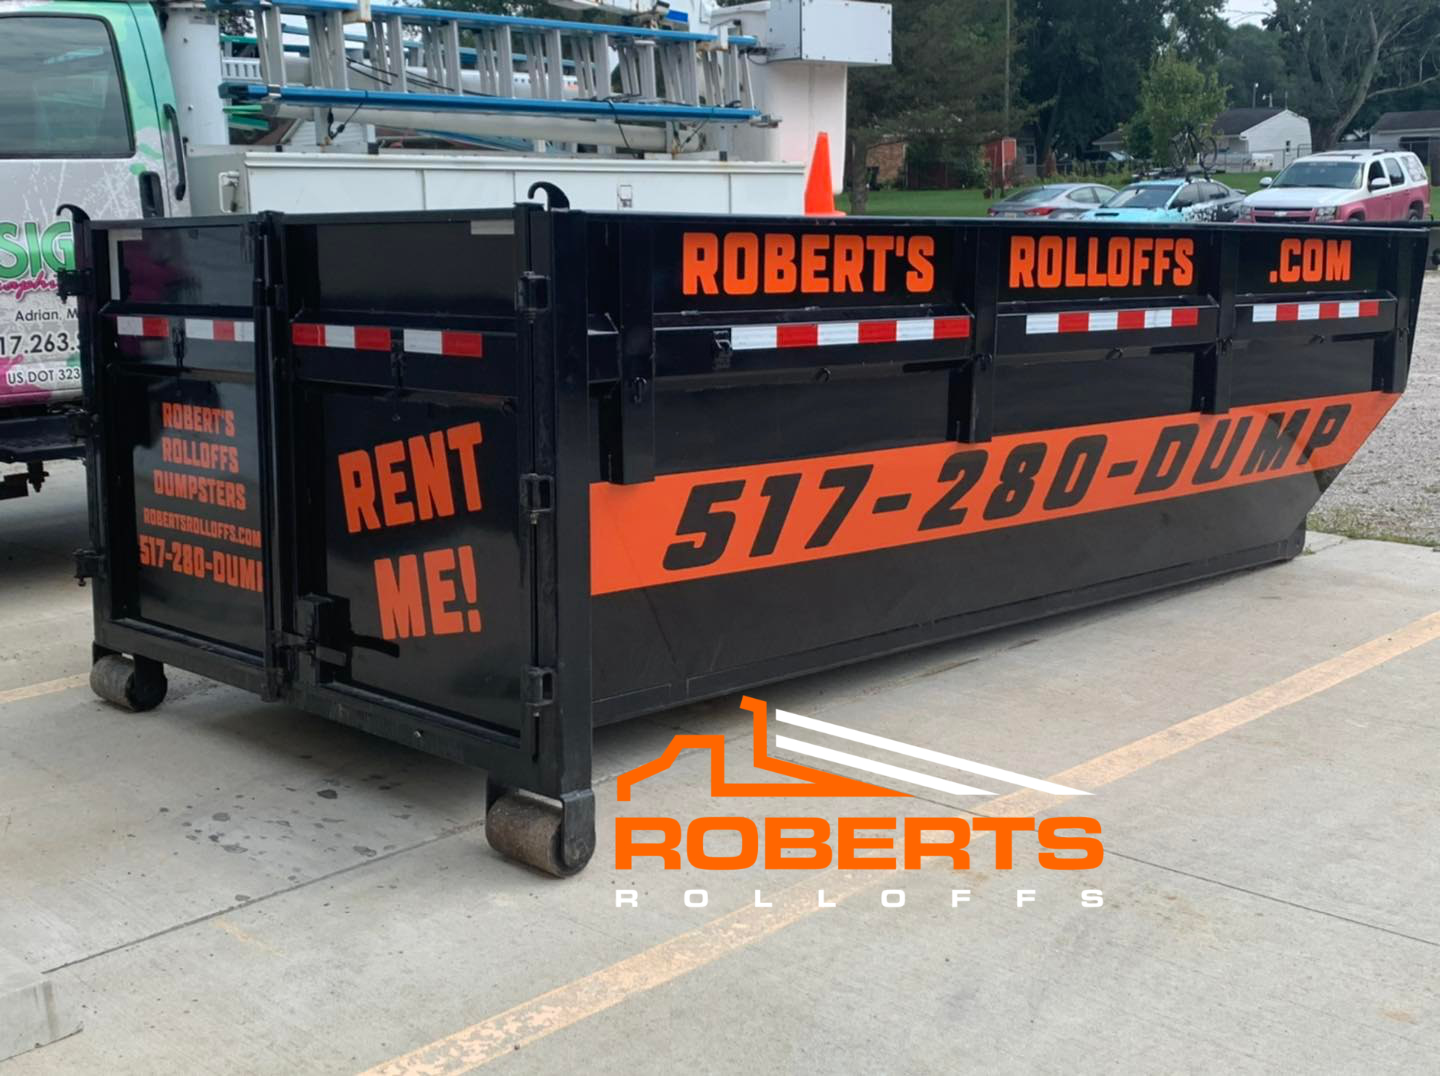  Construction Dumpster Rental Southeast Michigan Contractors Use Year-Round